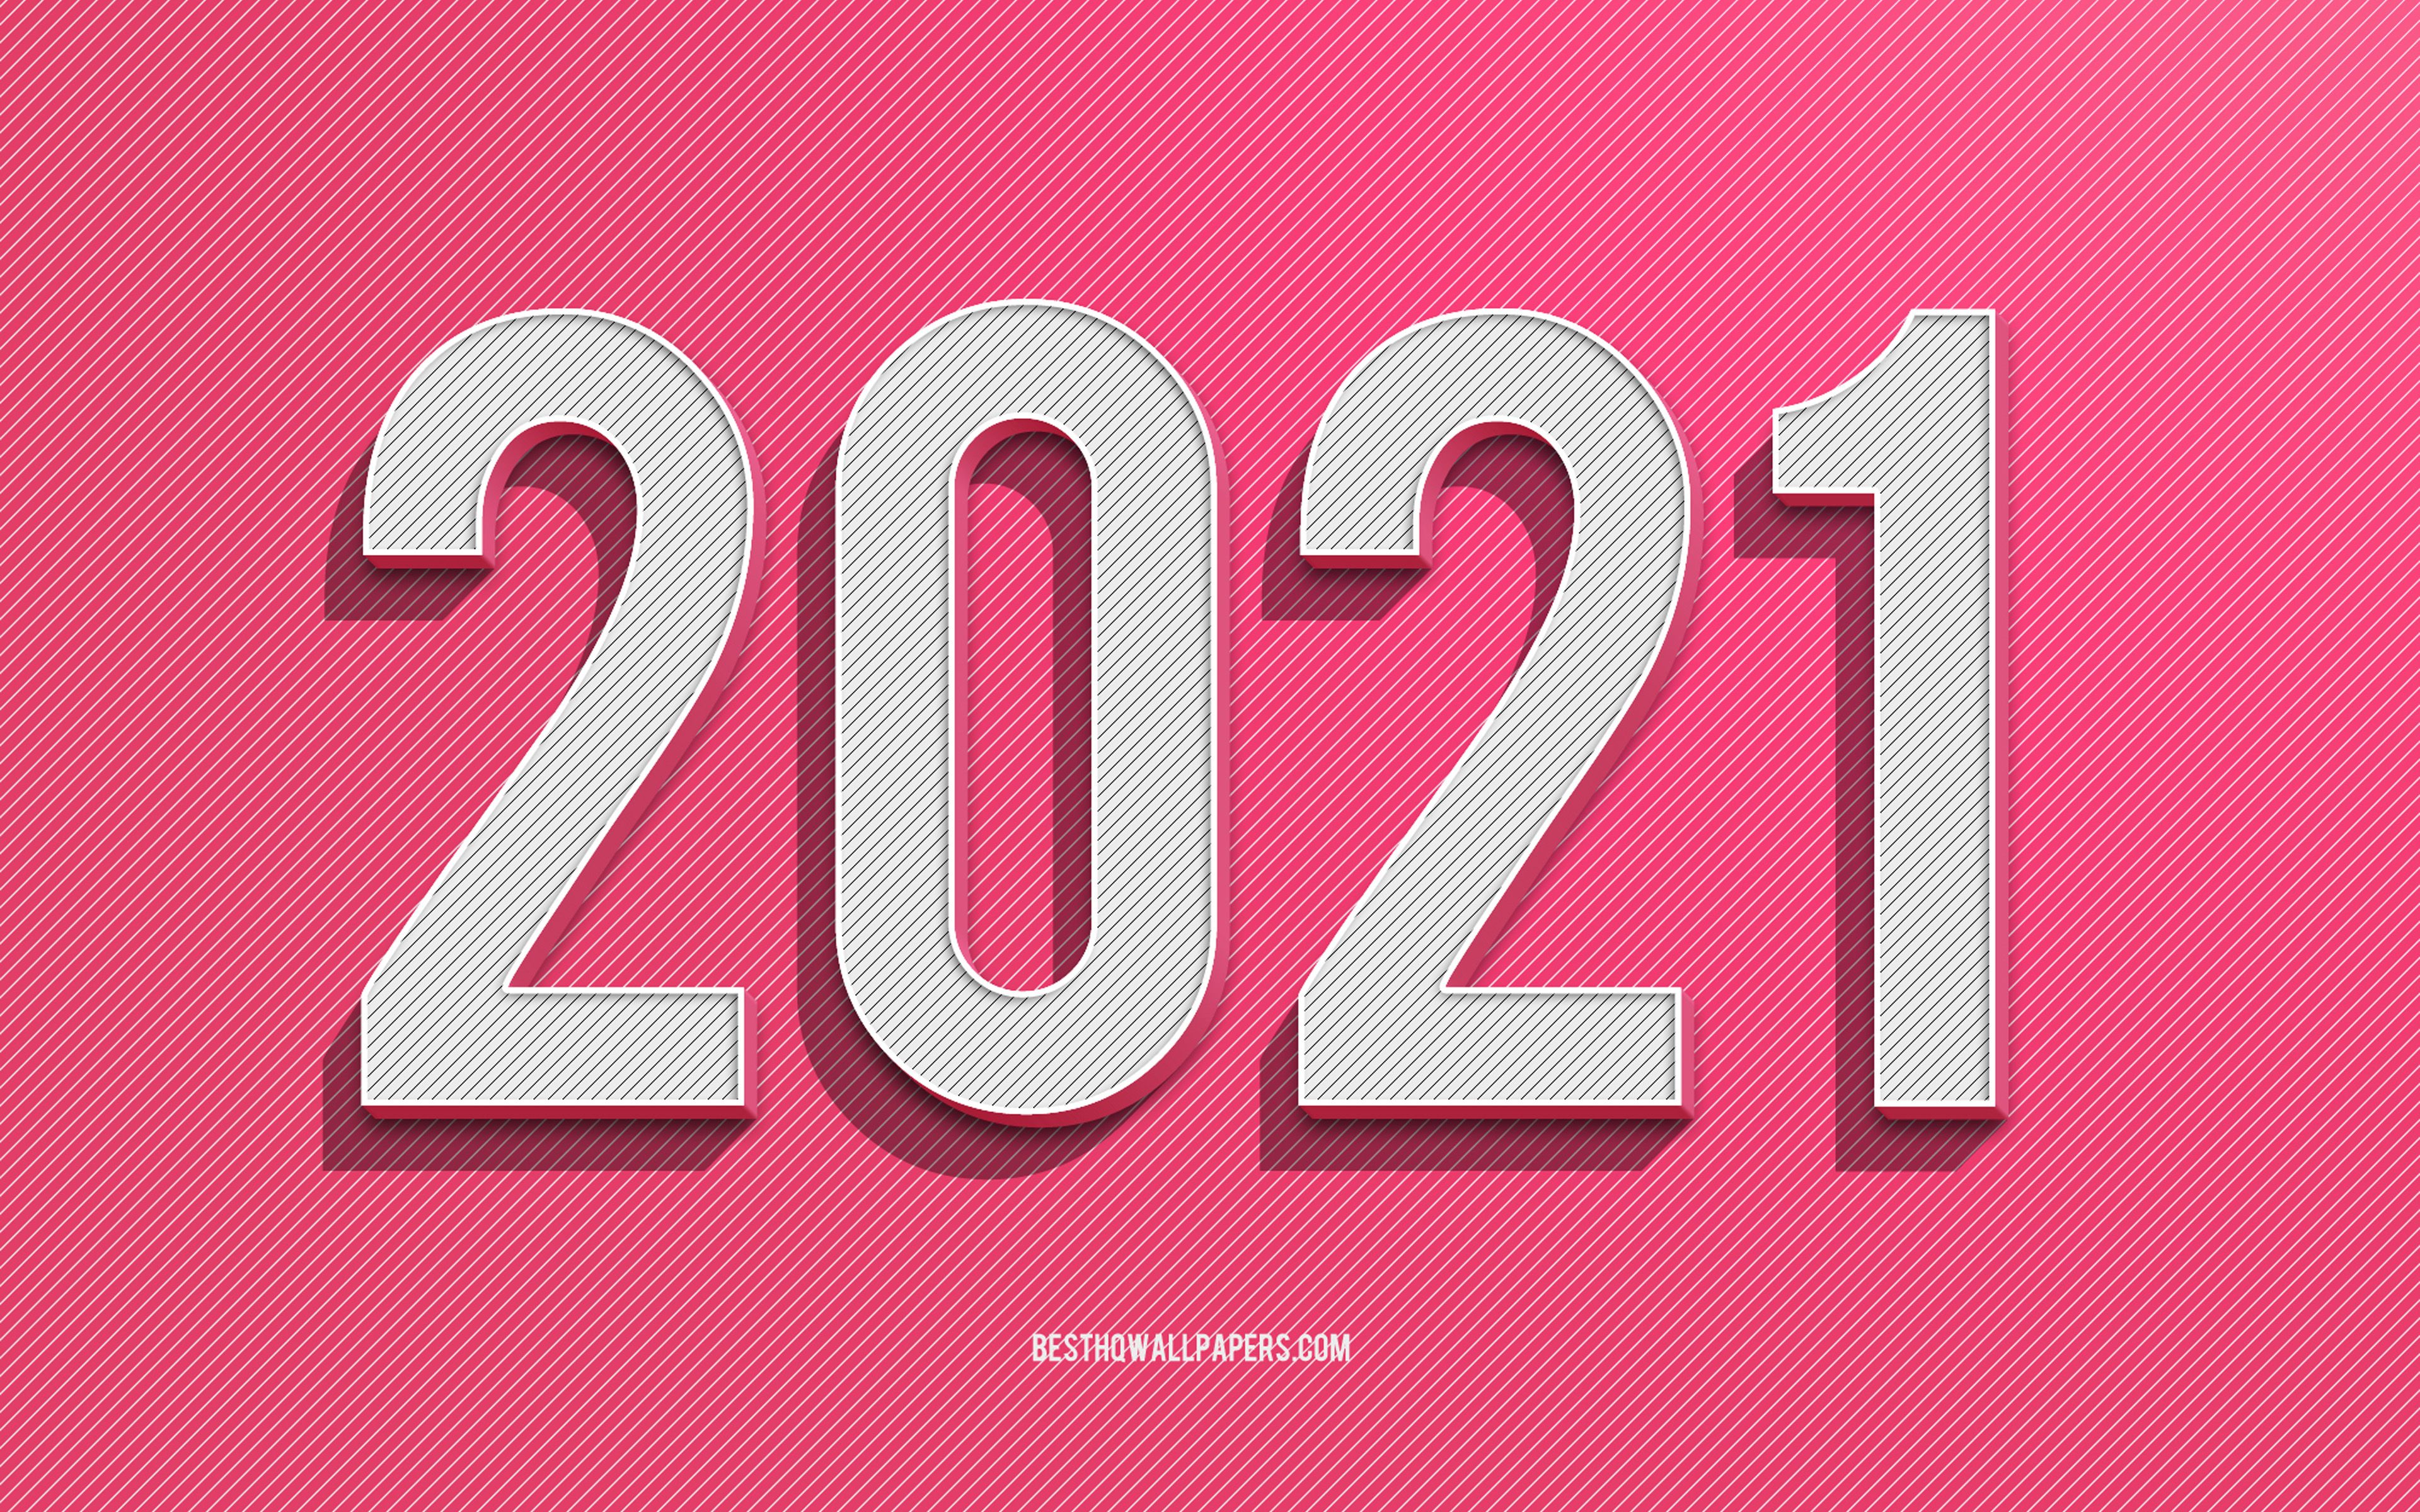 Download wallpaper 2021 New Year, 2021 Pink background, 2021 concepts, creative art, Happy New Year pink lines background for desktop with resolution 3840x2400. High Quality HD picture wallpaper